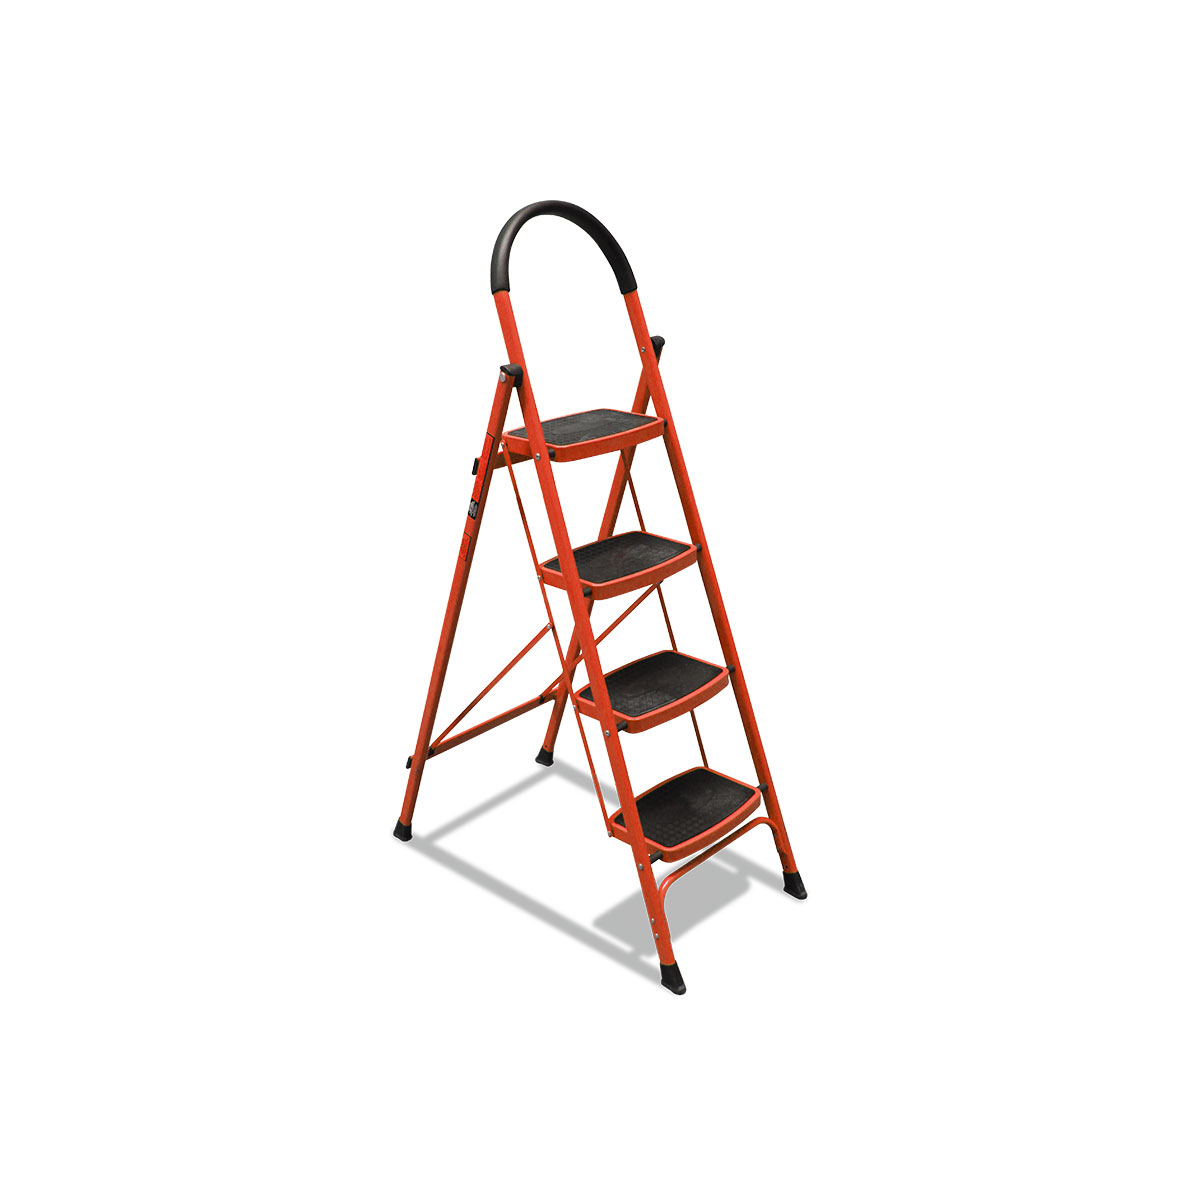 Step Ladder Domestic Use - Red Finish